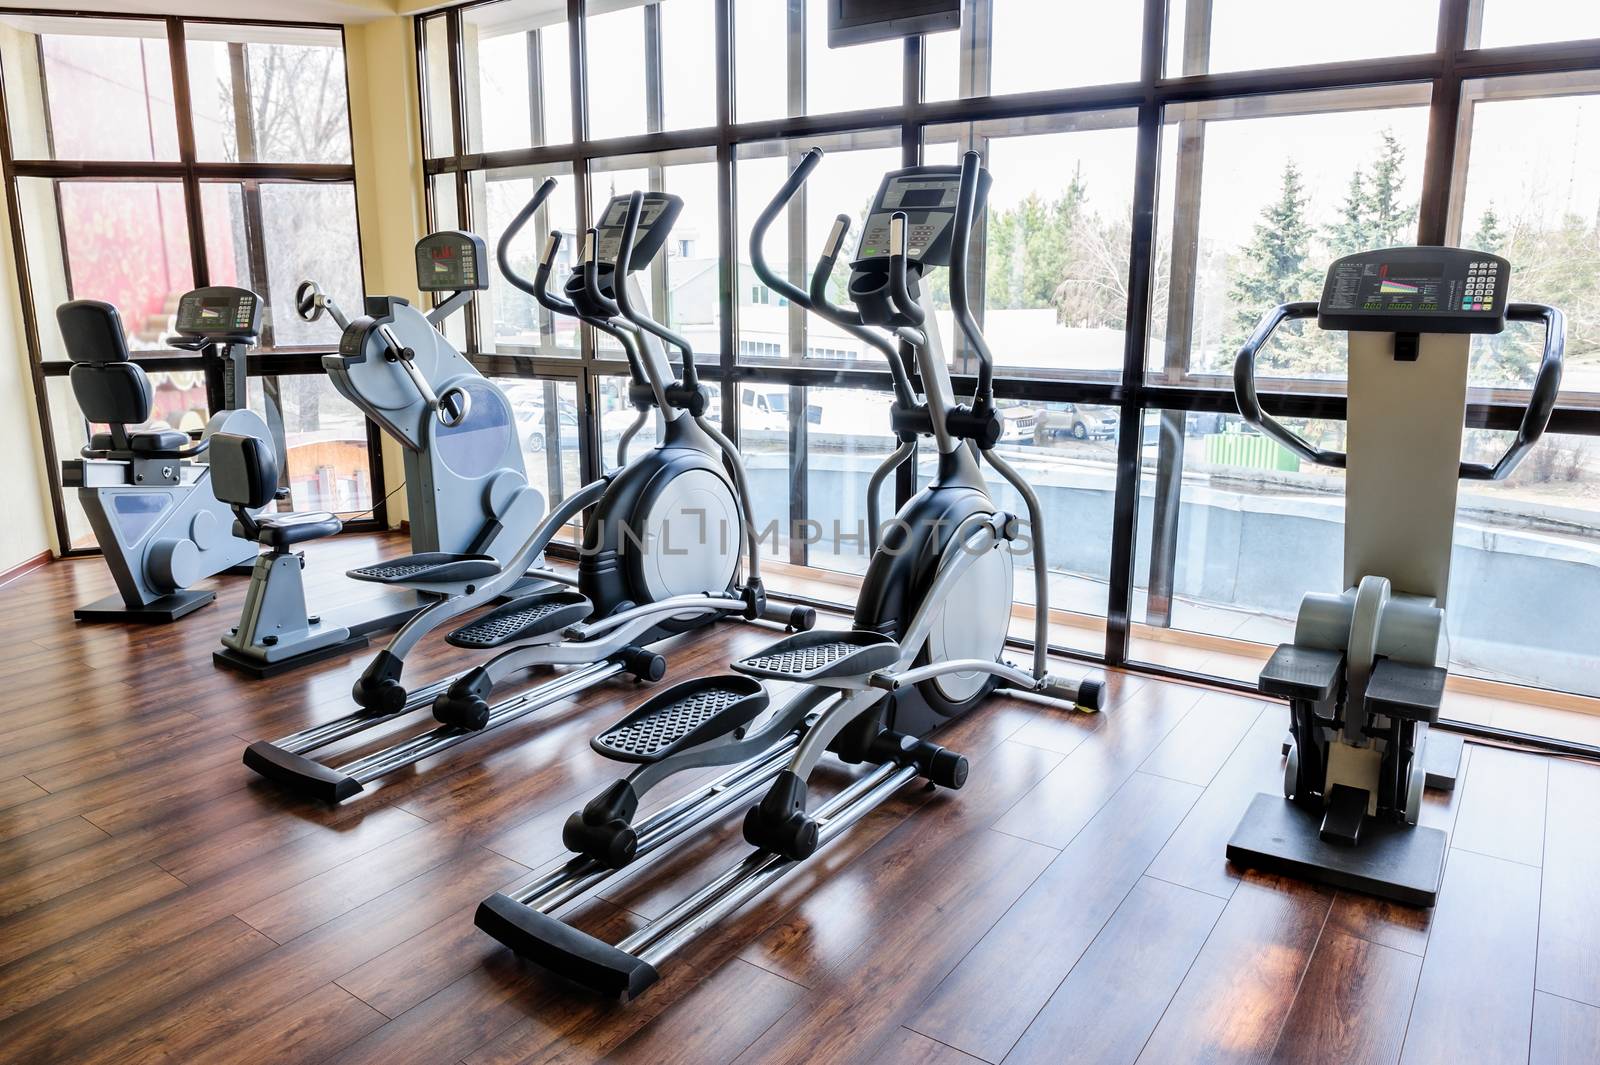 Set of treadmills staying in line in the gym